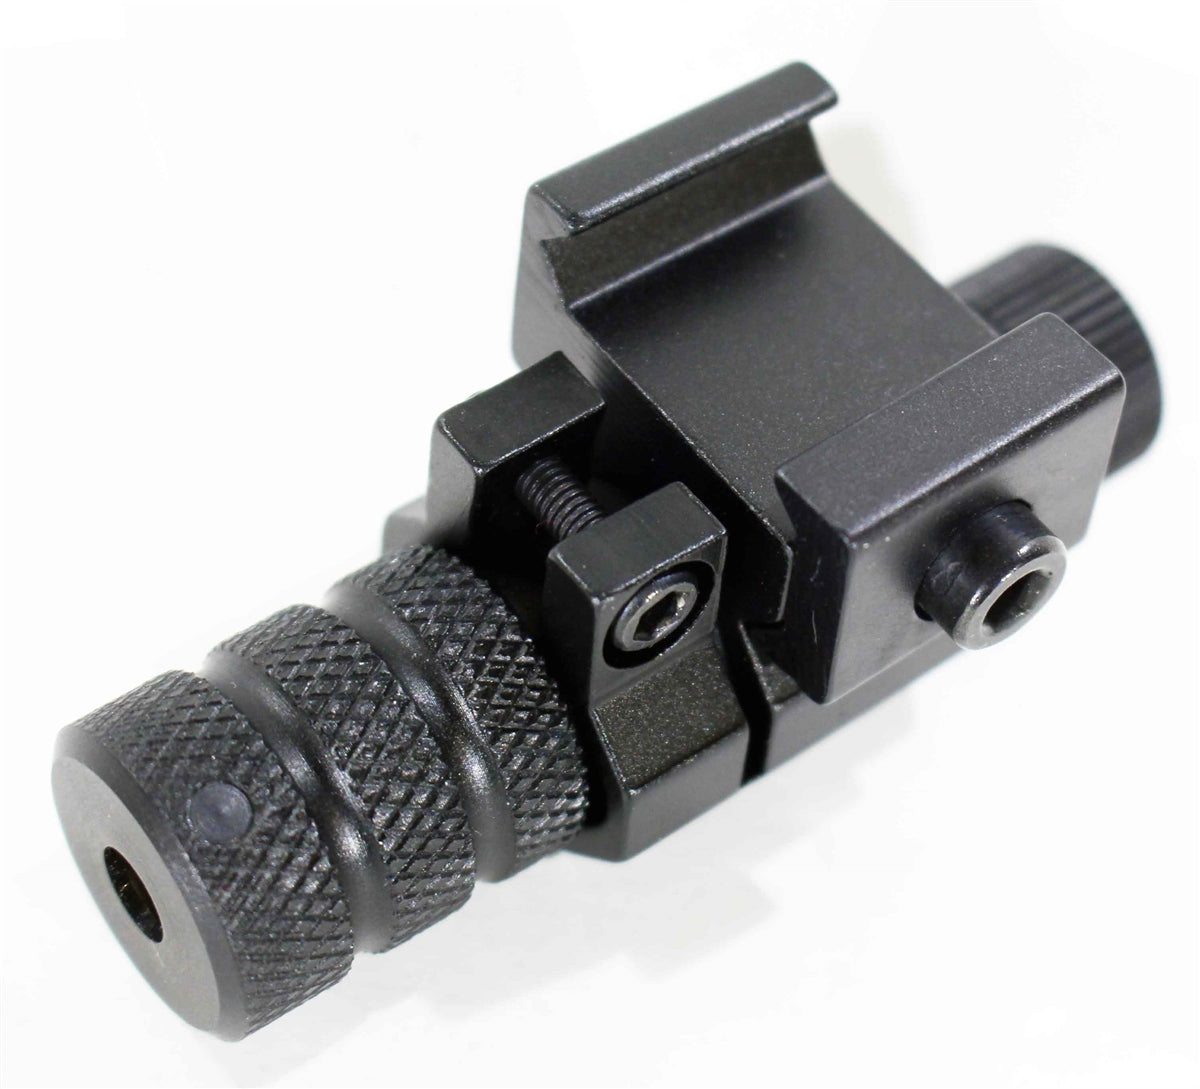 red laser sight for glock 17.